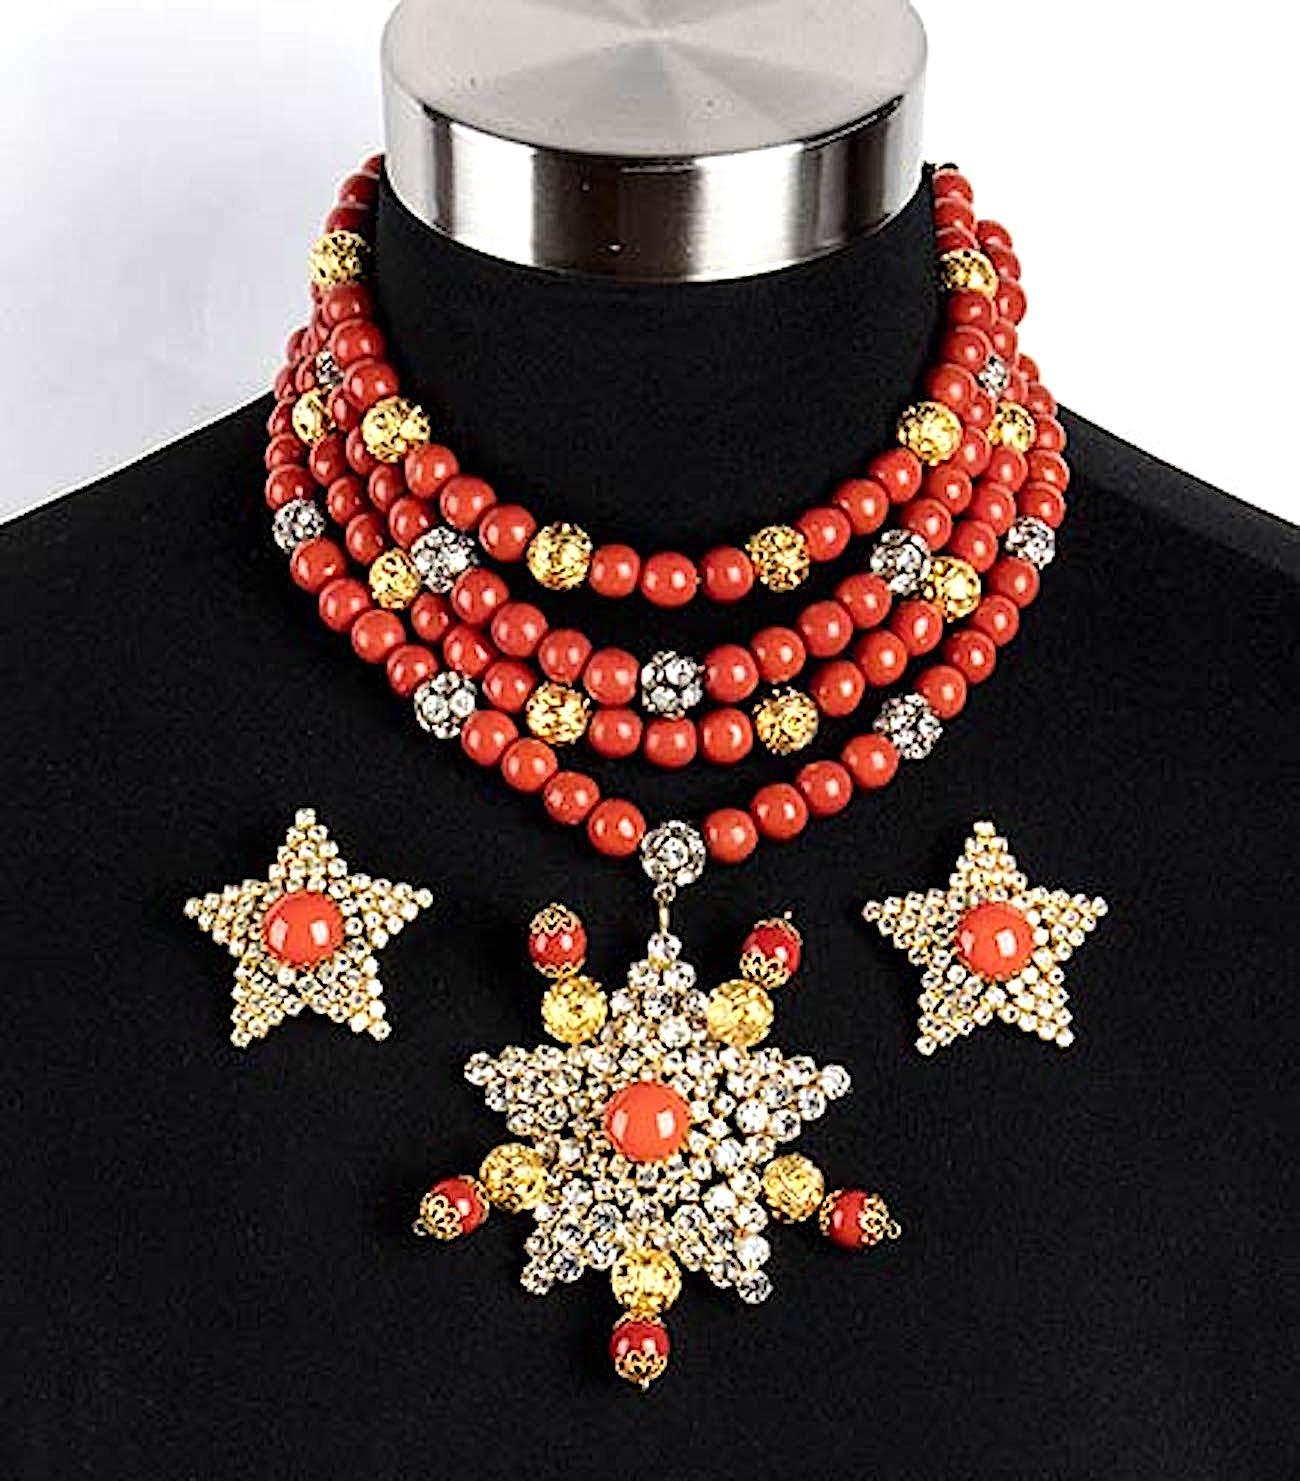 
A truly remarkable choker or dog collar style necklace from the 1970s by Princess Helietta Caracciolo. Four strands of faux red coral resin beads are strung on wire with gold and rhinestone set beads. They end with a multi strand hook and eye